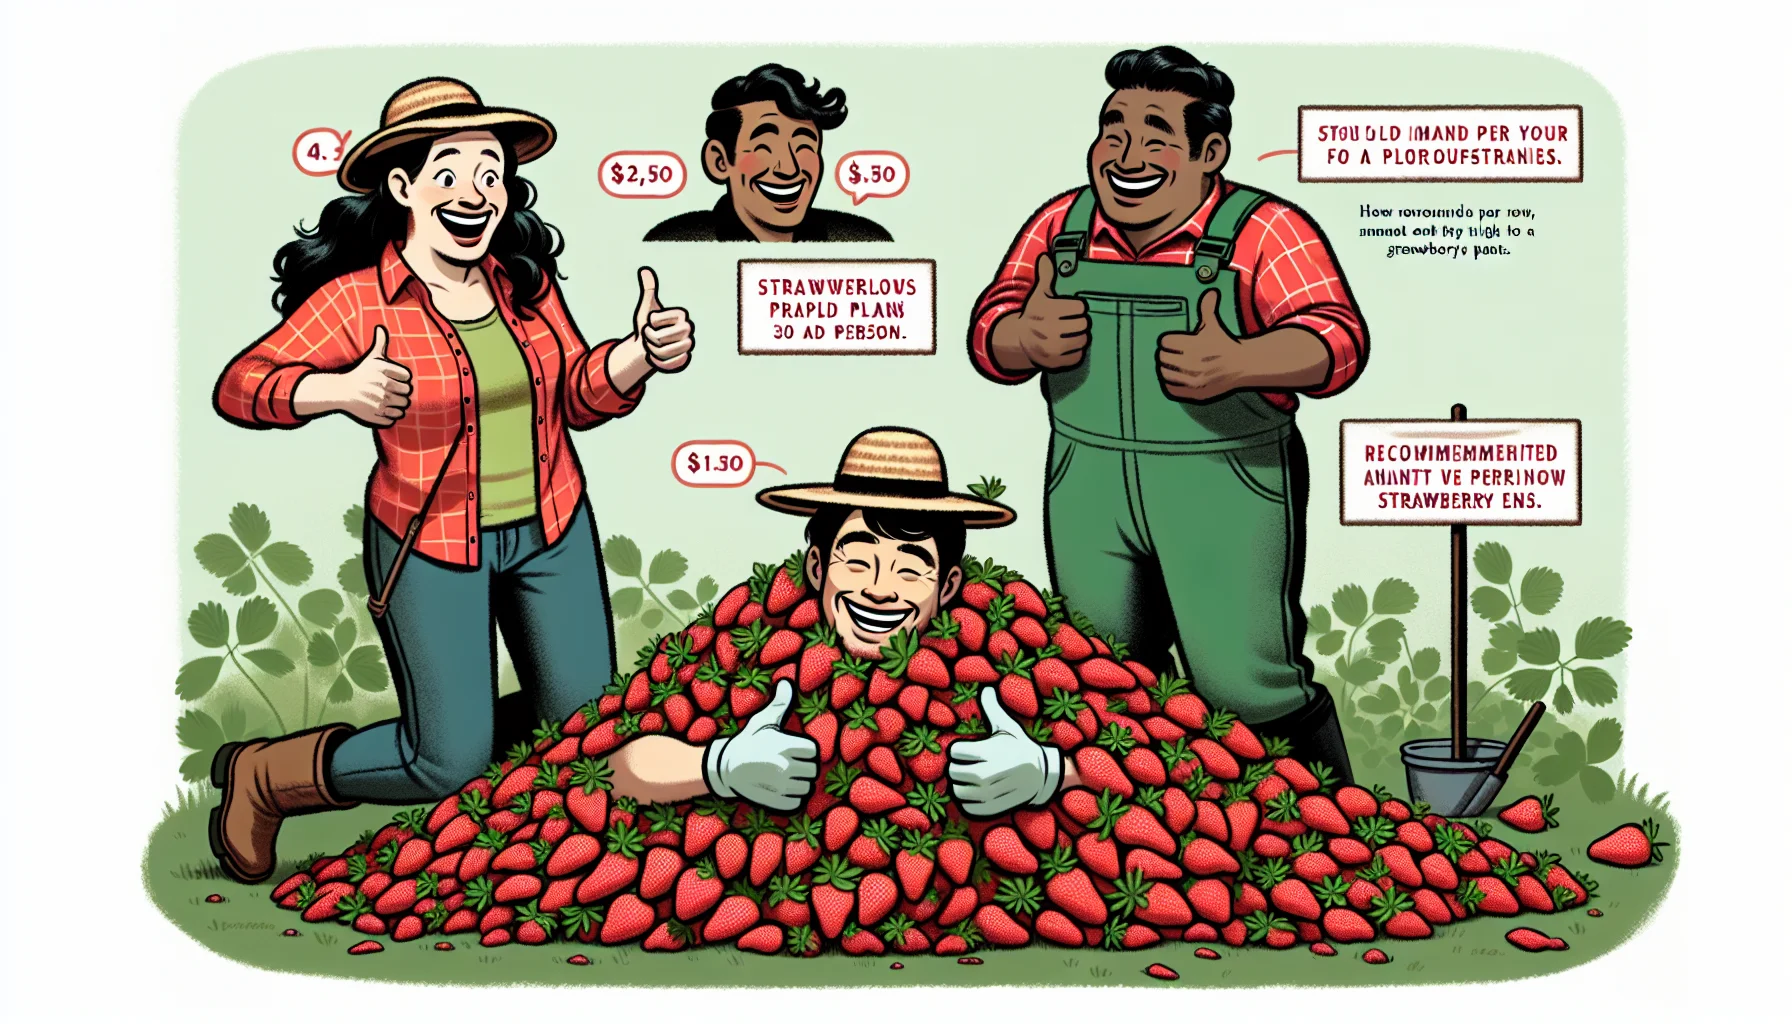 Visualize a humorous, garden-related scenario where three individuals of different descents, a Caucasian woman, a Hispanic man, and a South Asian man, are depicted. Each person, grinning from ear to ear, is standing beside a pile of strawberry plants indicating the recommended amount per person for a plentiful harvest. The Caucasian woman is astonished by her small mountain of plants. The Hispanic man, draped in garden gear, is falling backwards into a heap of strawberry plants. The South Asian man is humorously buried in strawberry plants, only his hand is visible, giving thumbs up. These fun depictions aim to inspire a love for gardening.